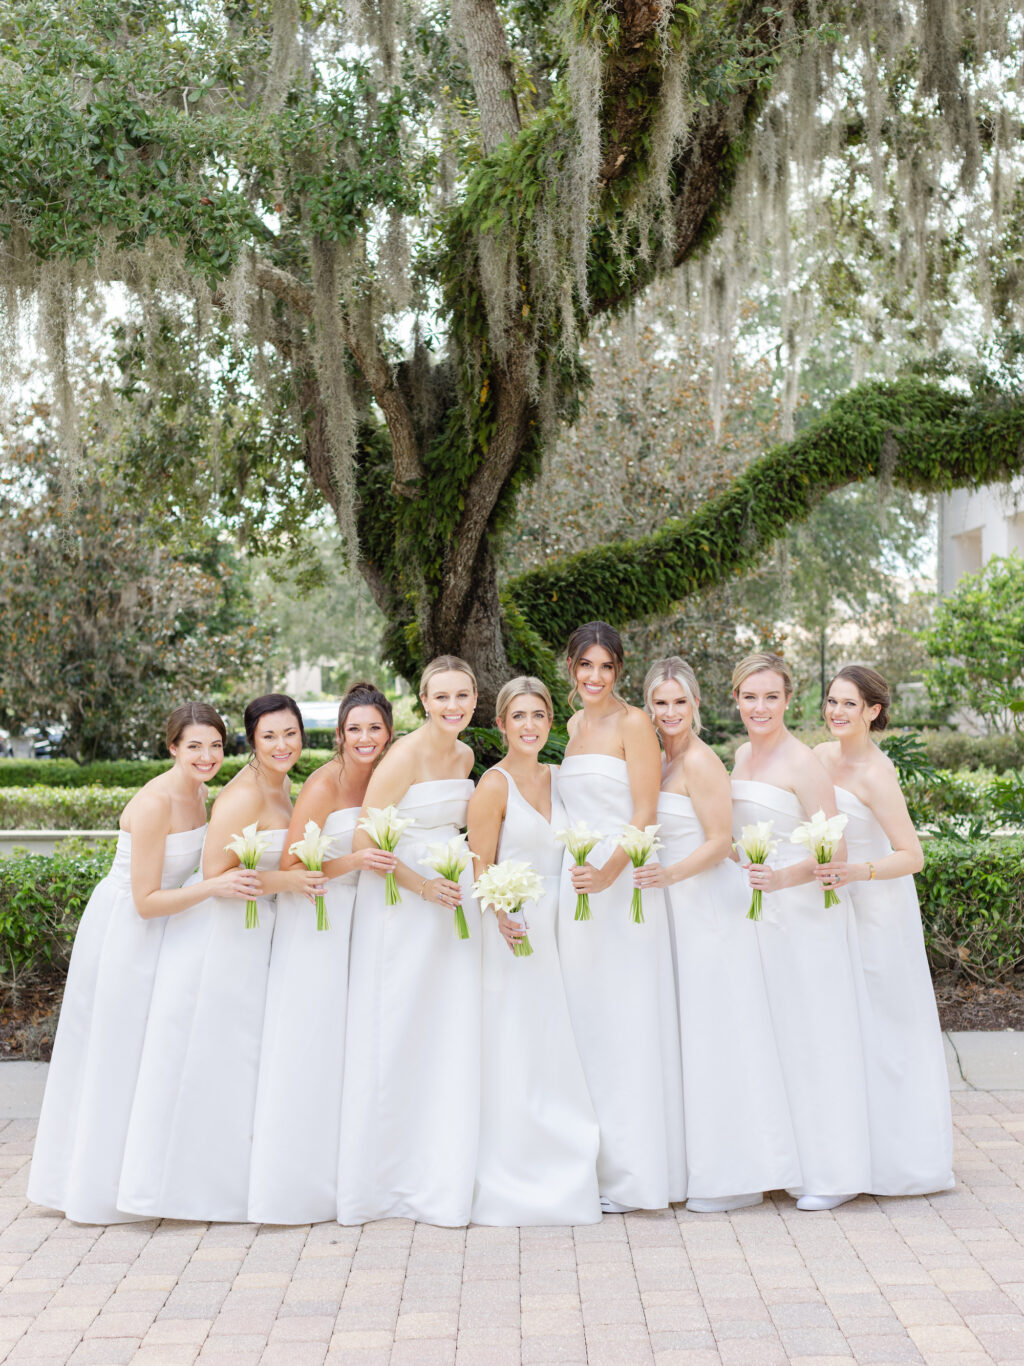 All-White Amsale Bella Bridesmaids Strapless Dress Ideas with Classic Cala Lily Bouquets